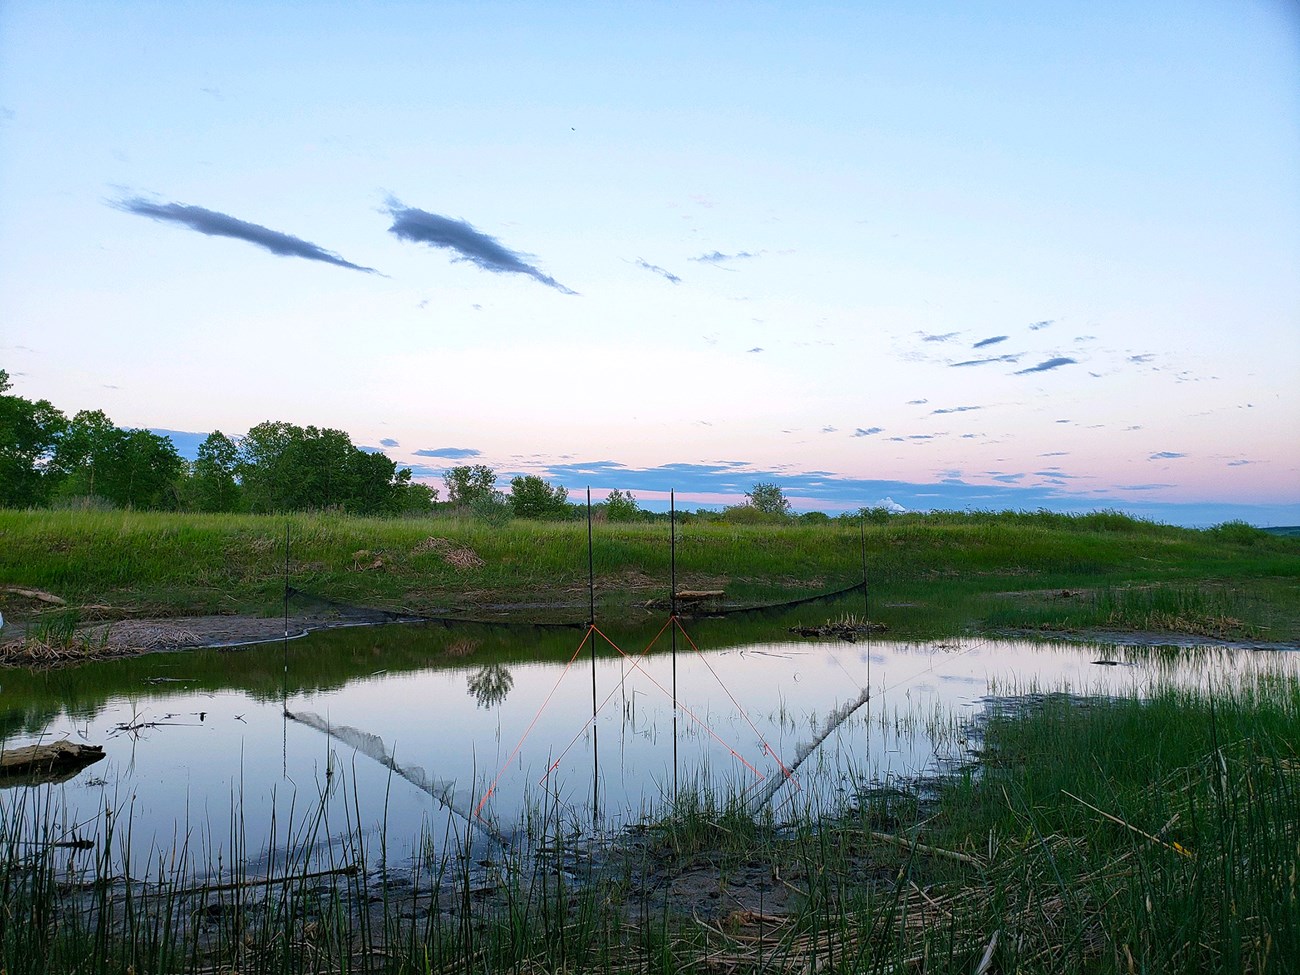 Two mist nets in a "V" configuration across a wetland at dusk. The nets are bunched together in the middle of the poles, waiting to be stretched out and fully deployed.